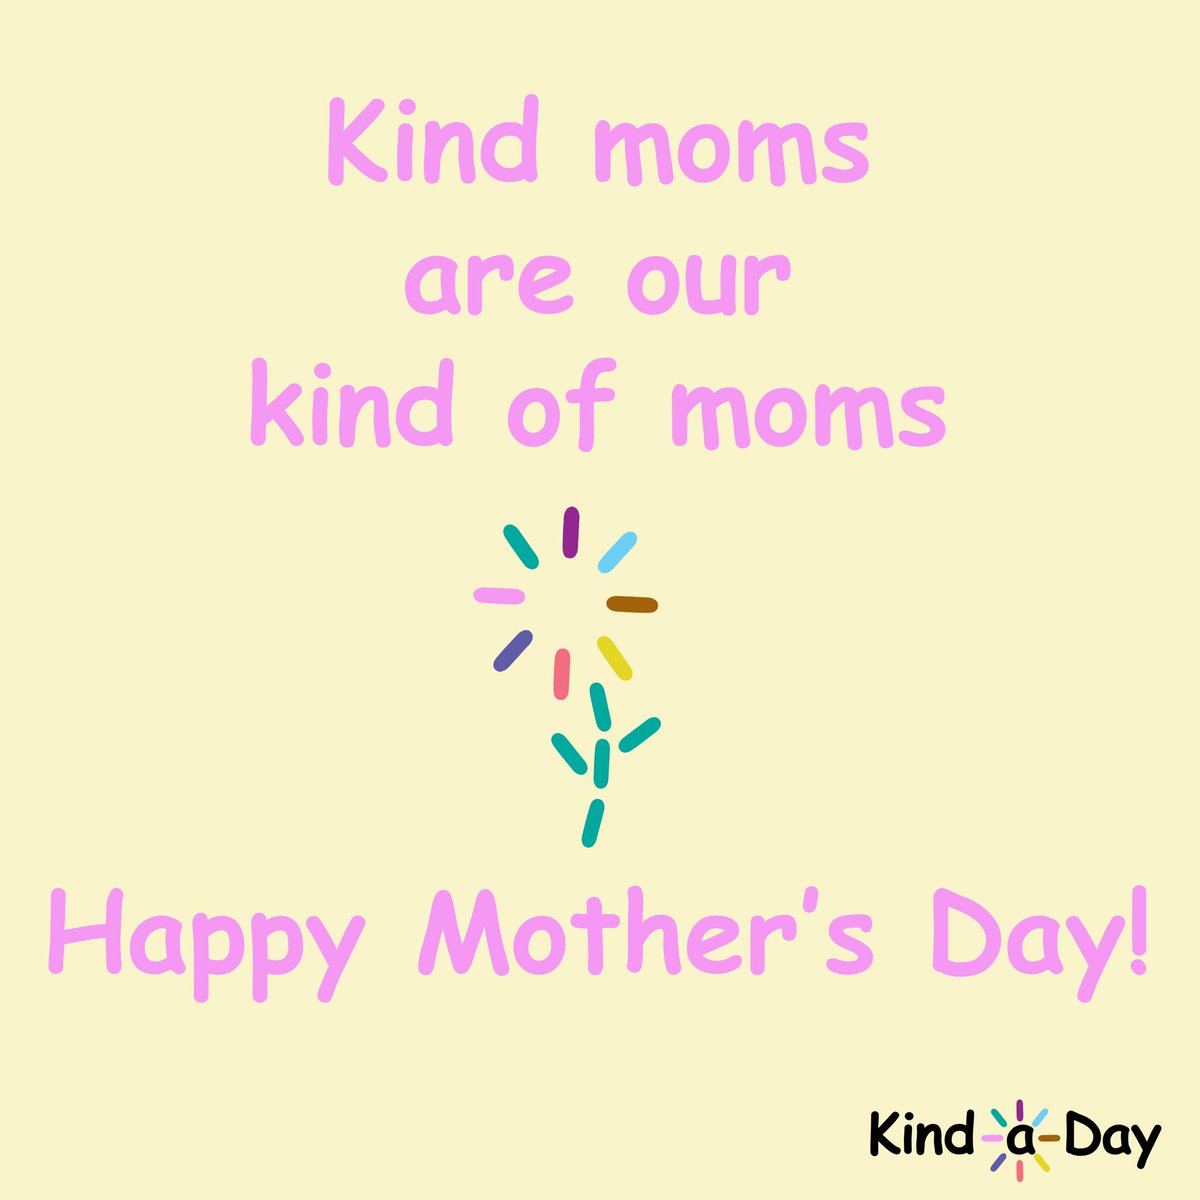 Kind moms are our kinds of moms. Happy Mother’s Day! 🌸
 
#MothersDay #HappyMothersDay #kind #BeKind #kindness #KindLife #ActsOfKindness #SpreadKindness #KindnessMatters #ChooseKindness #KindnessWins #KindaDay #KindnessAlways #KindnessEveryday #Kindness365 #KindnessChallenge